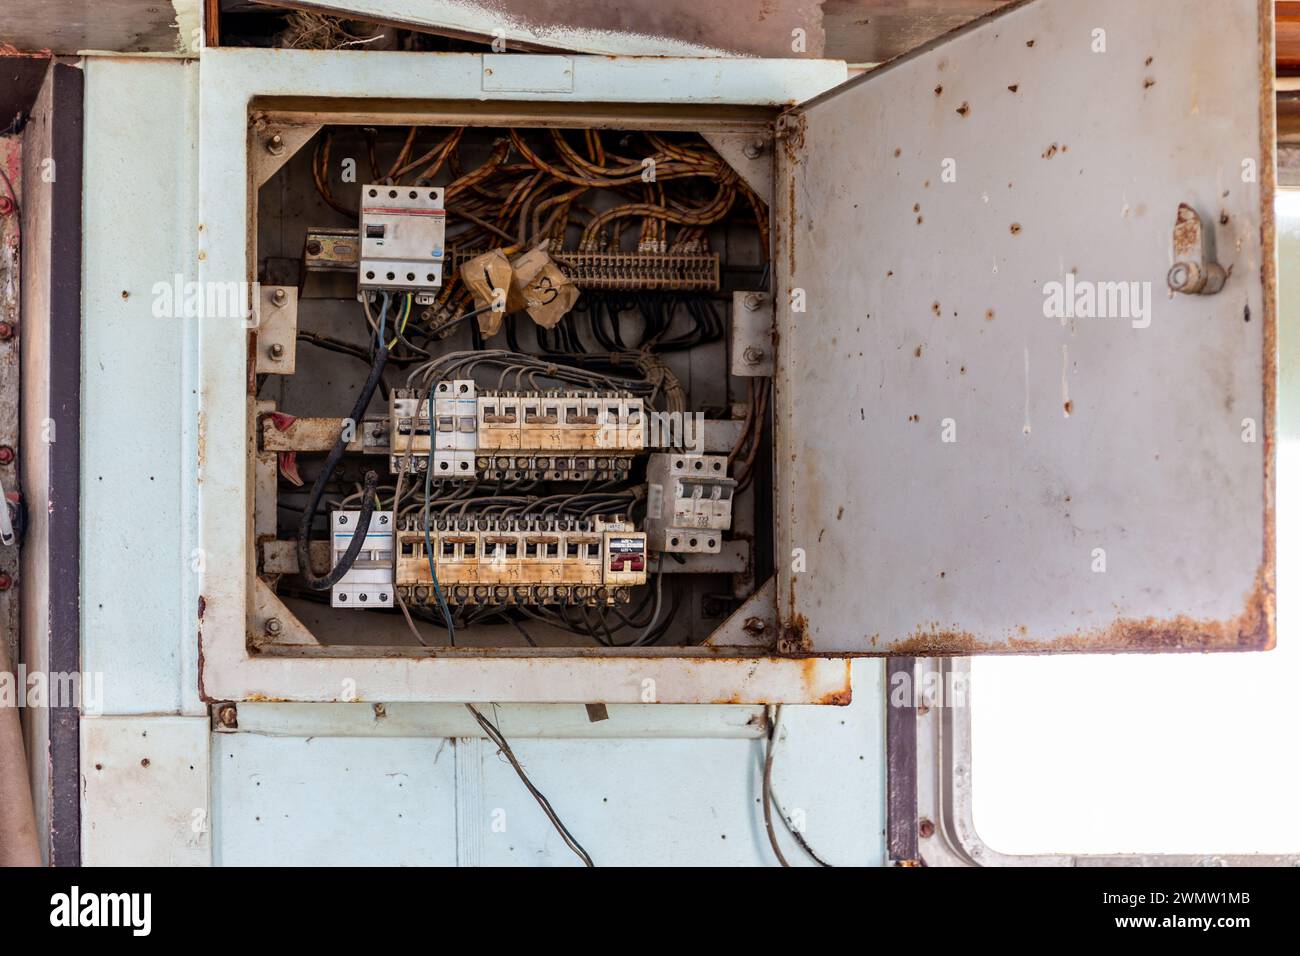 Old, rusty circuit breaker box with switches and cable wiring, inside view. Circuit breaker panel on damaged cargo ship bridge washed ashore, Stock Photo